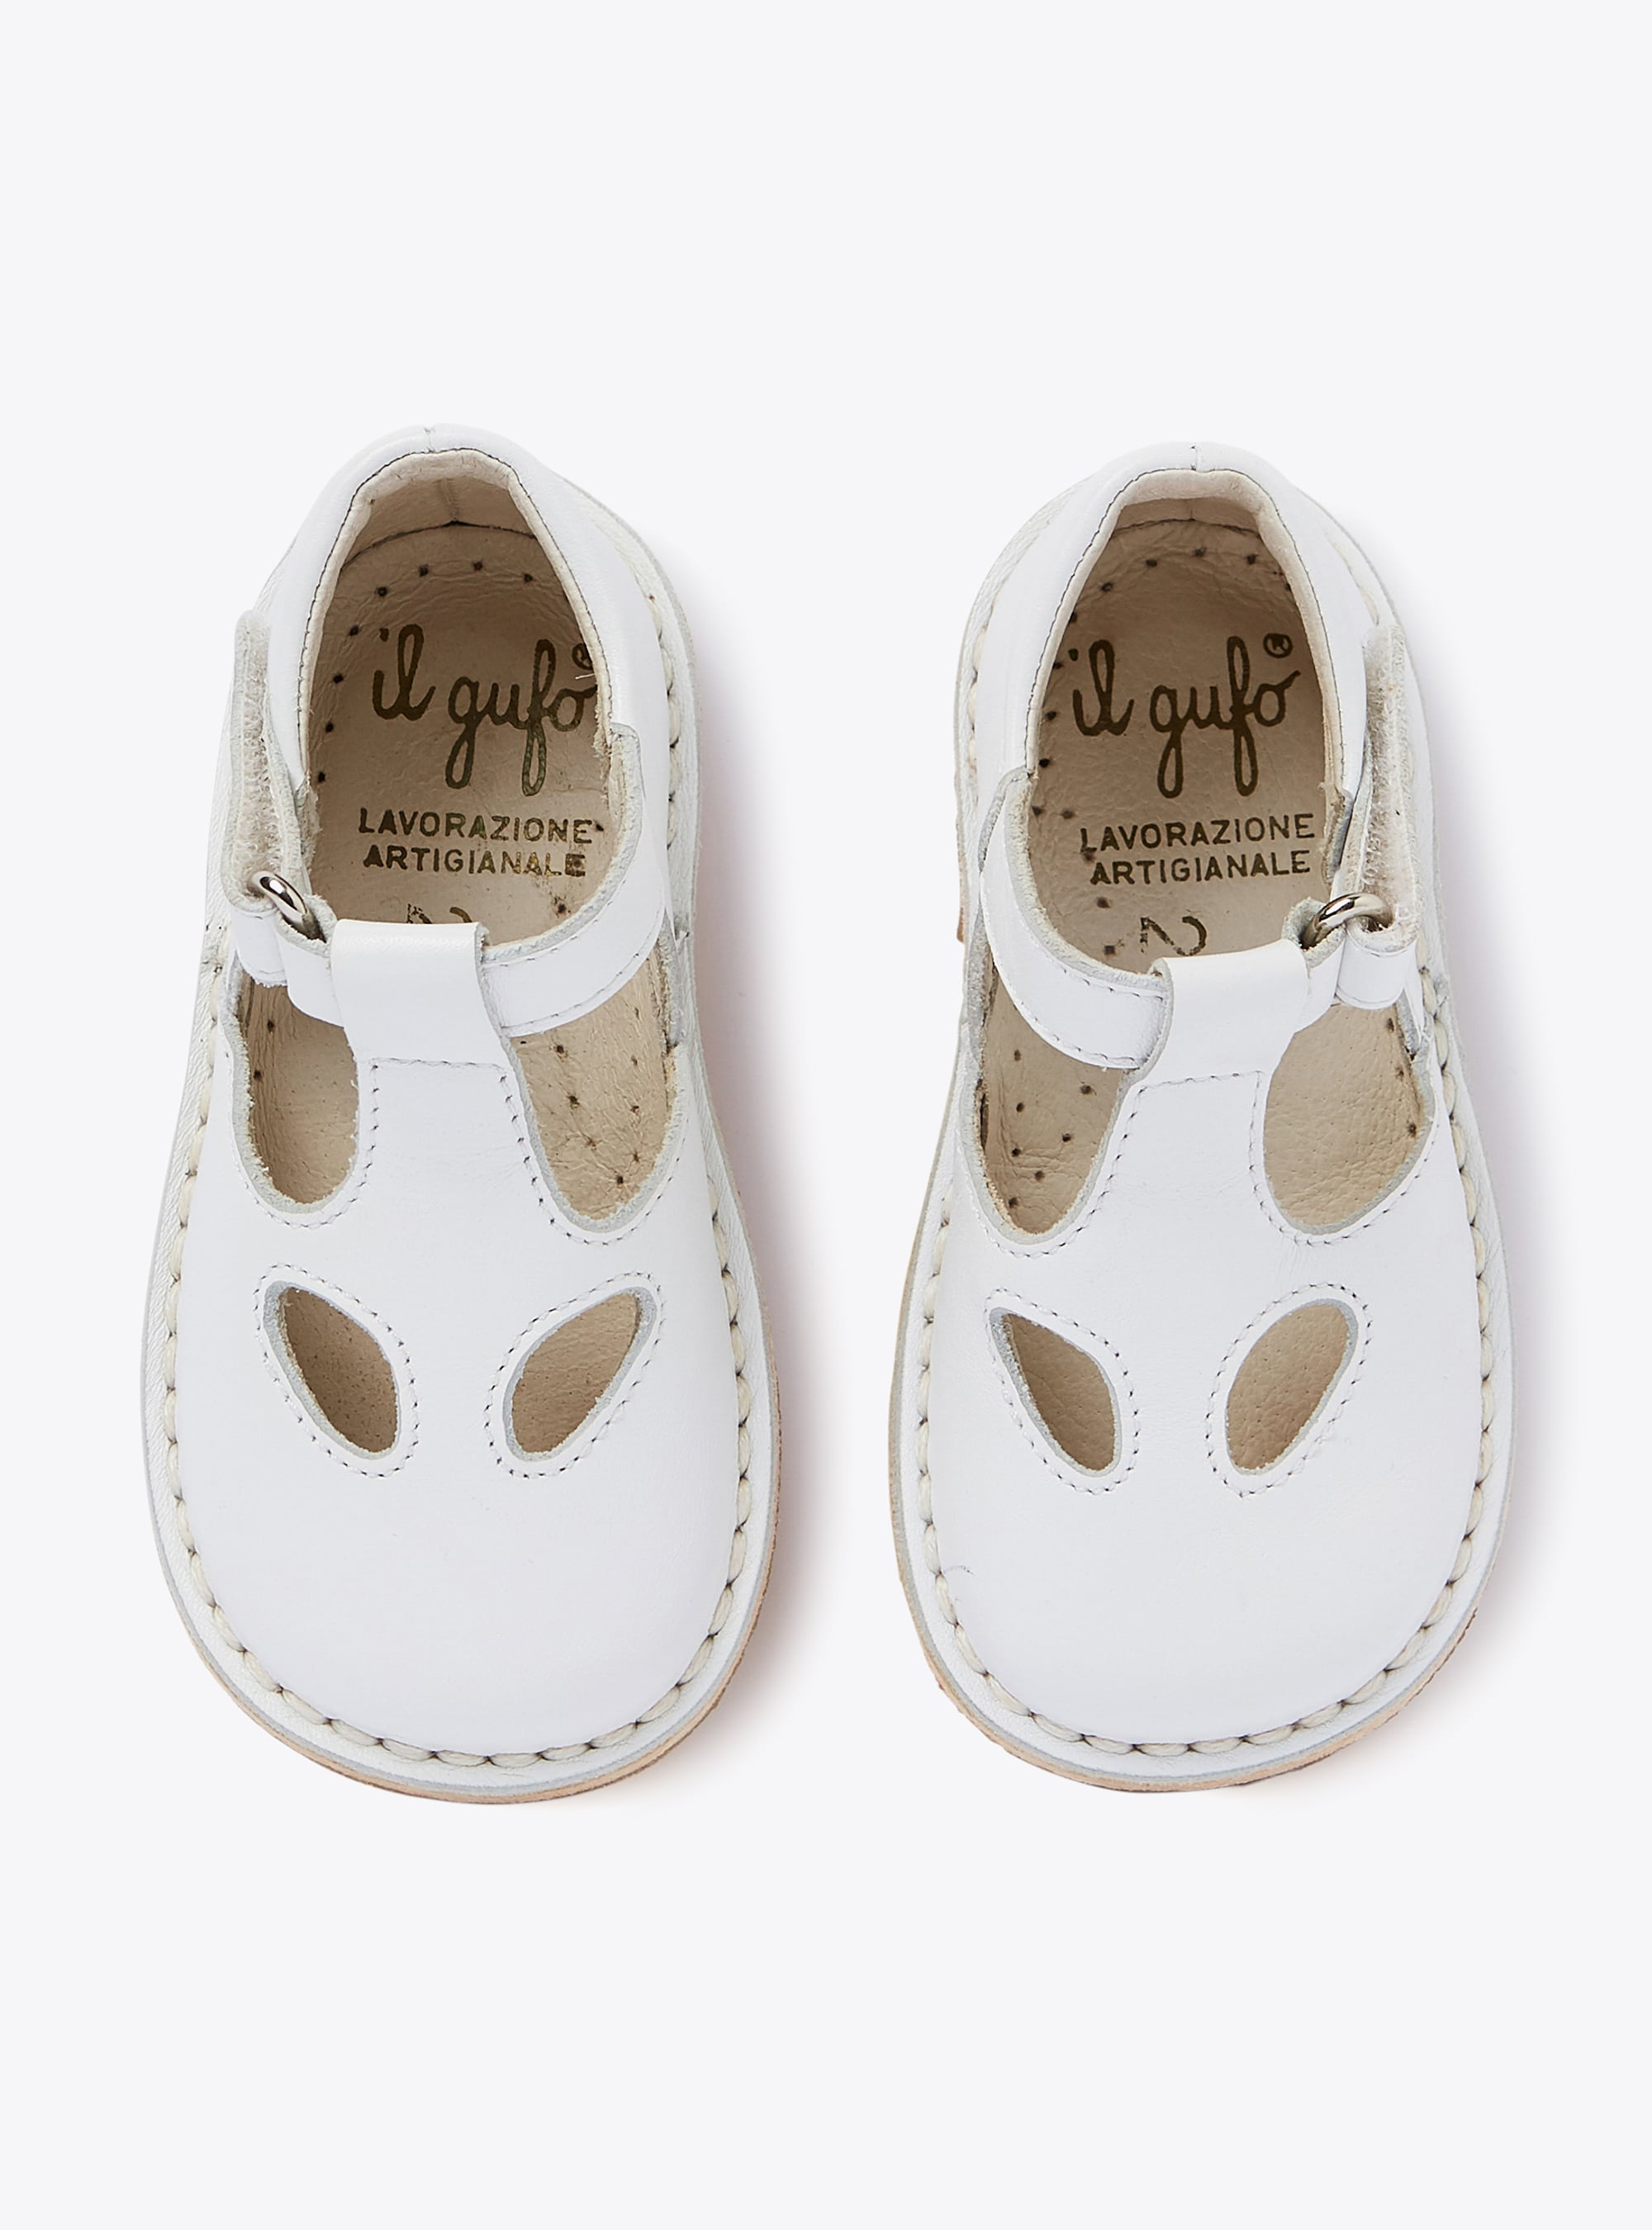 White leather sandals with two holes - White | Il Gufo